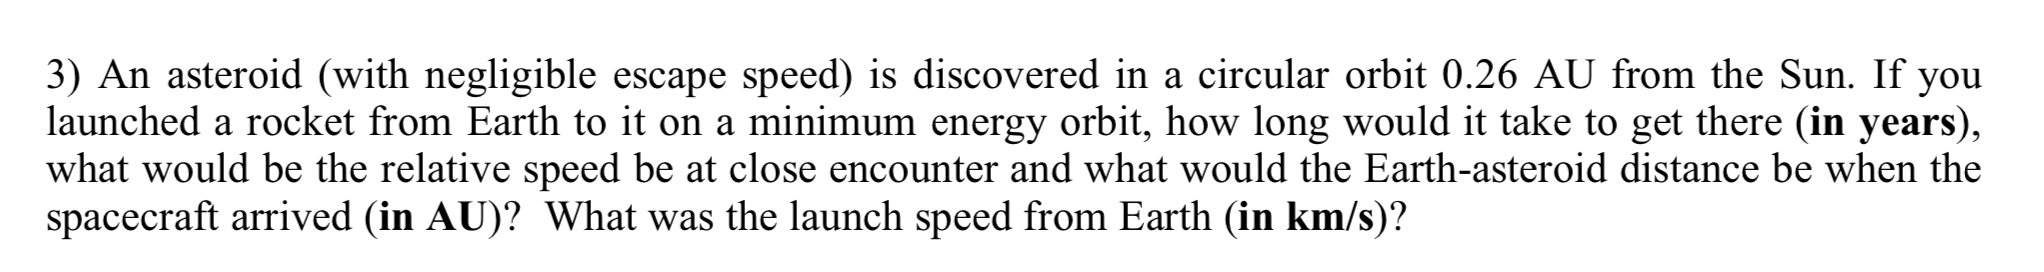 3) An asteroid (with negligible escape speed) is discovered in a circular orbit 0.26 AU from the Sun. If you
launched a rocket from Earth to it on a minimum energy orbit, how long would it take to get there (in years),
what would be the relative speed be at close encounter and what would the Earth-asteroid distance be when the
spacecraft arrived (in AU)? What was the launch speed from Earth (in km/s)?
